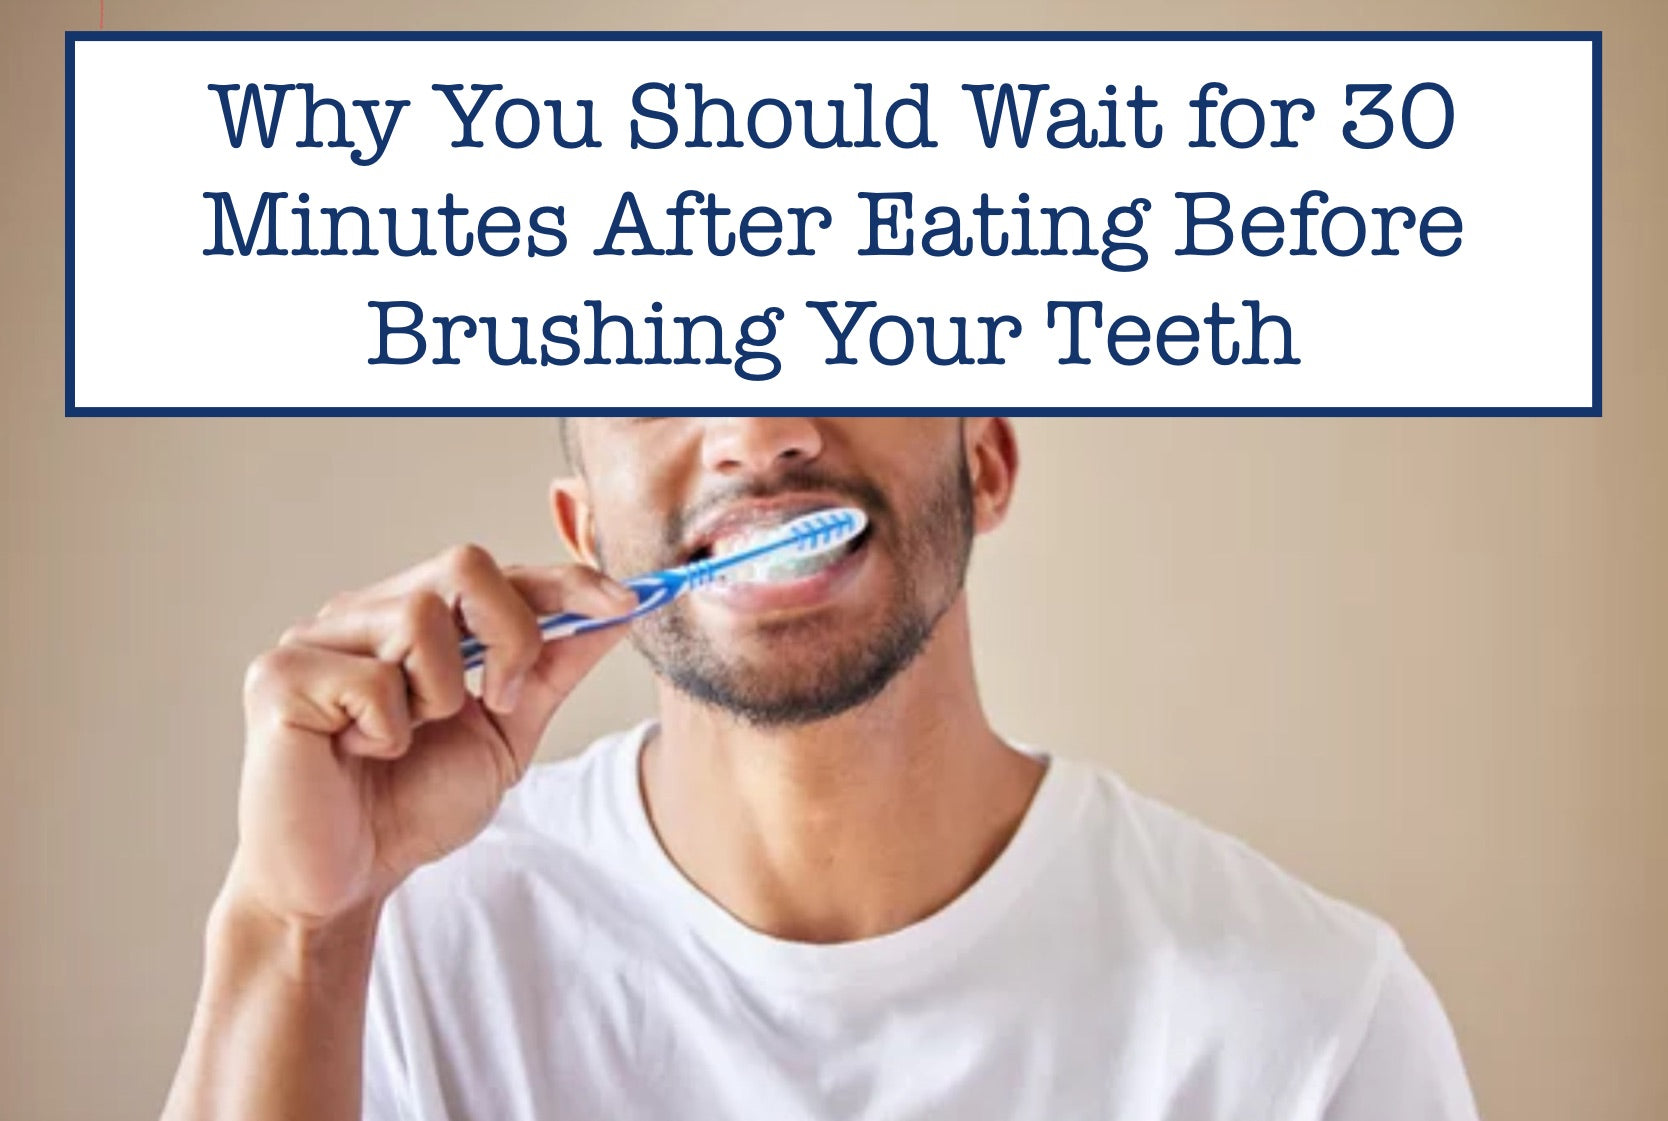 Why You Should Wait for 30 Minutes After Eating Before Brushing Your Teeth